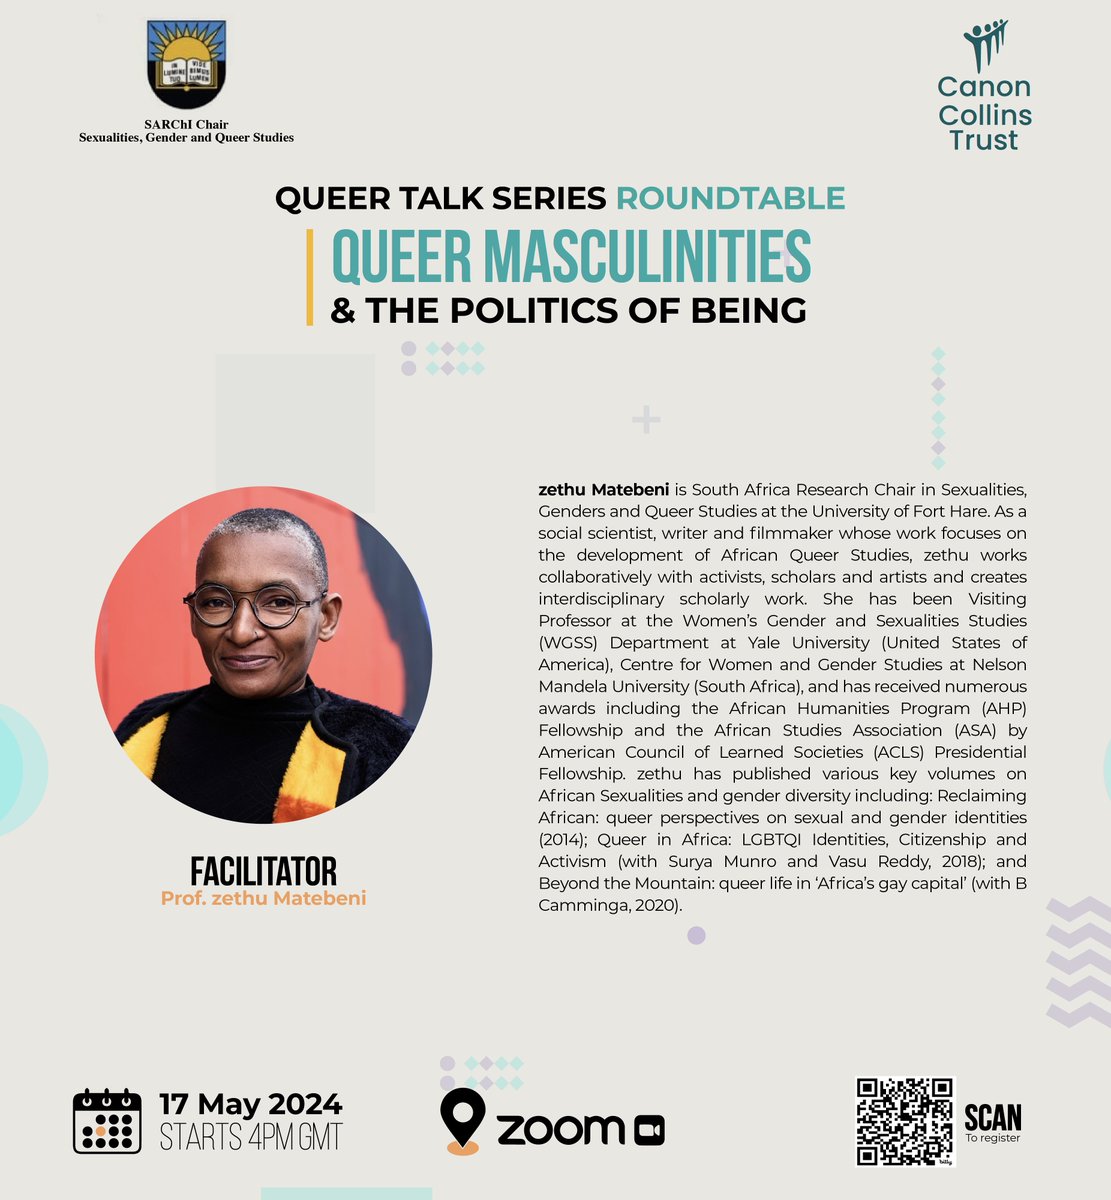 Meet Prof zethu Matebeni, the South Africa Research Chair in Sexualities, Genders and Queer Studies at the University of Fort Hare. Prof zethu will facilitate the 'Queer Masculinities and The Politics of Being' event happening on May 17th!